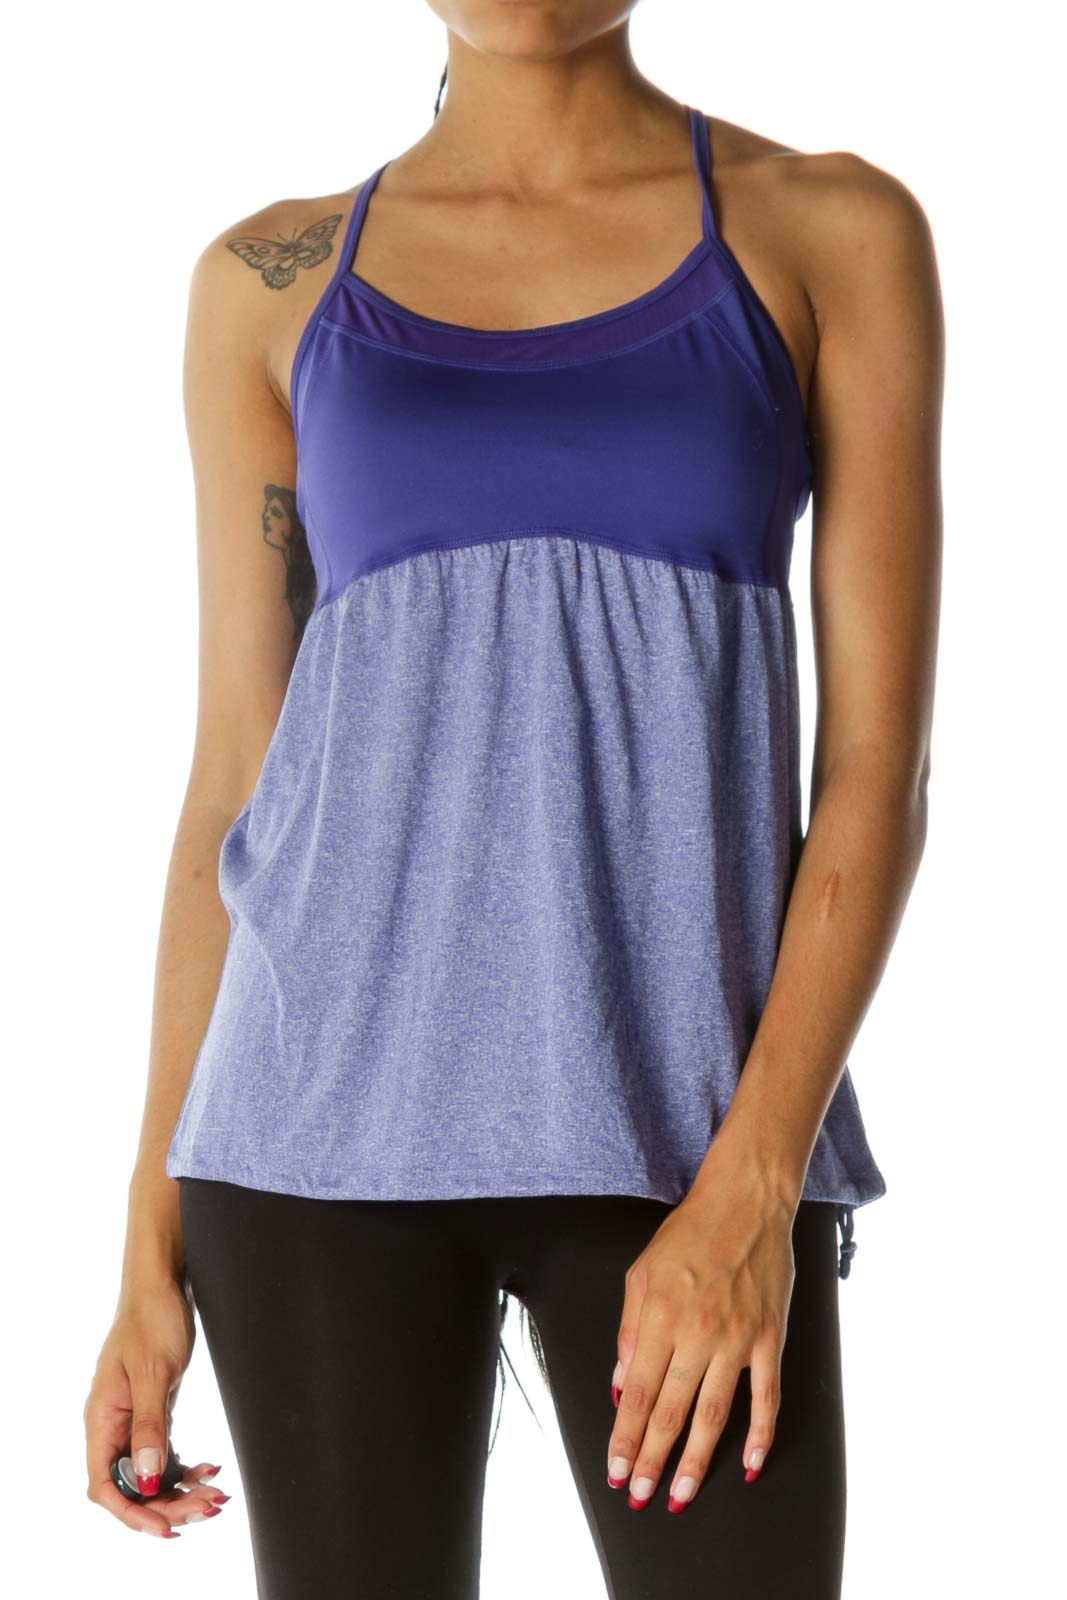 Purple Mottled Print Racerback Sports Top with Built-In Bra Front